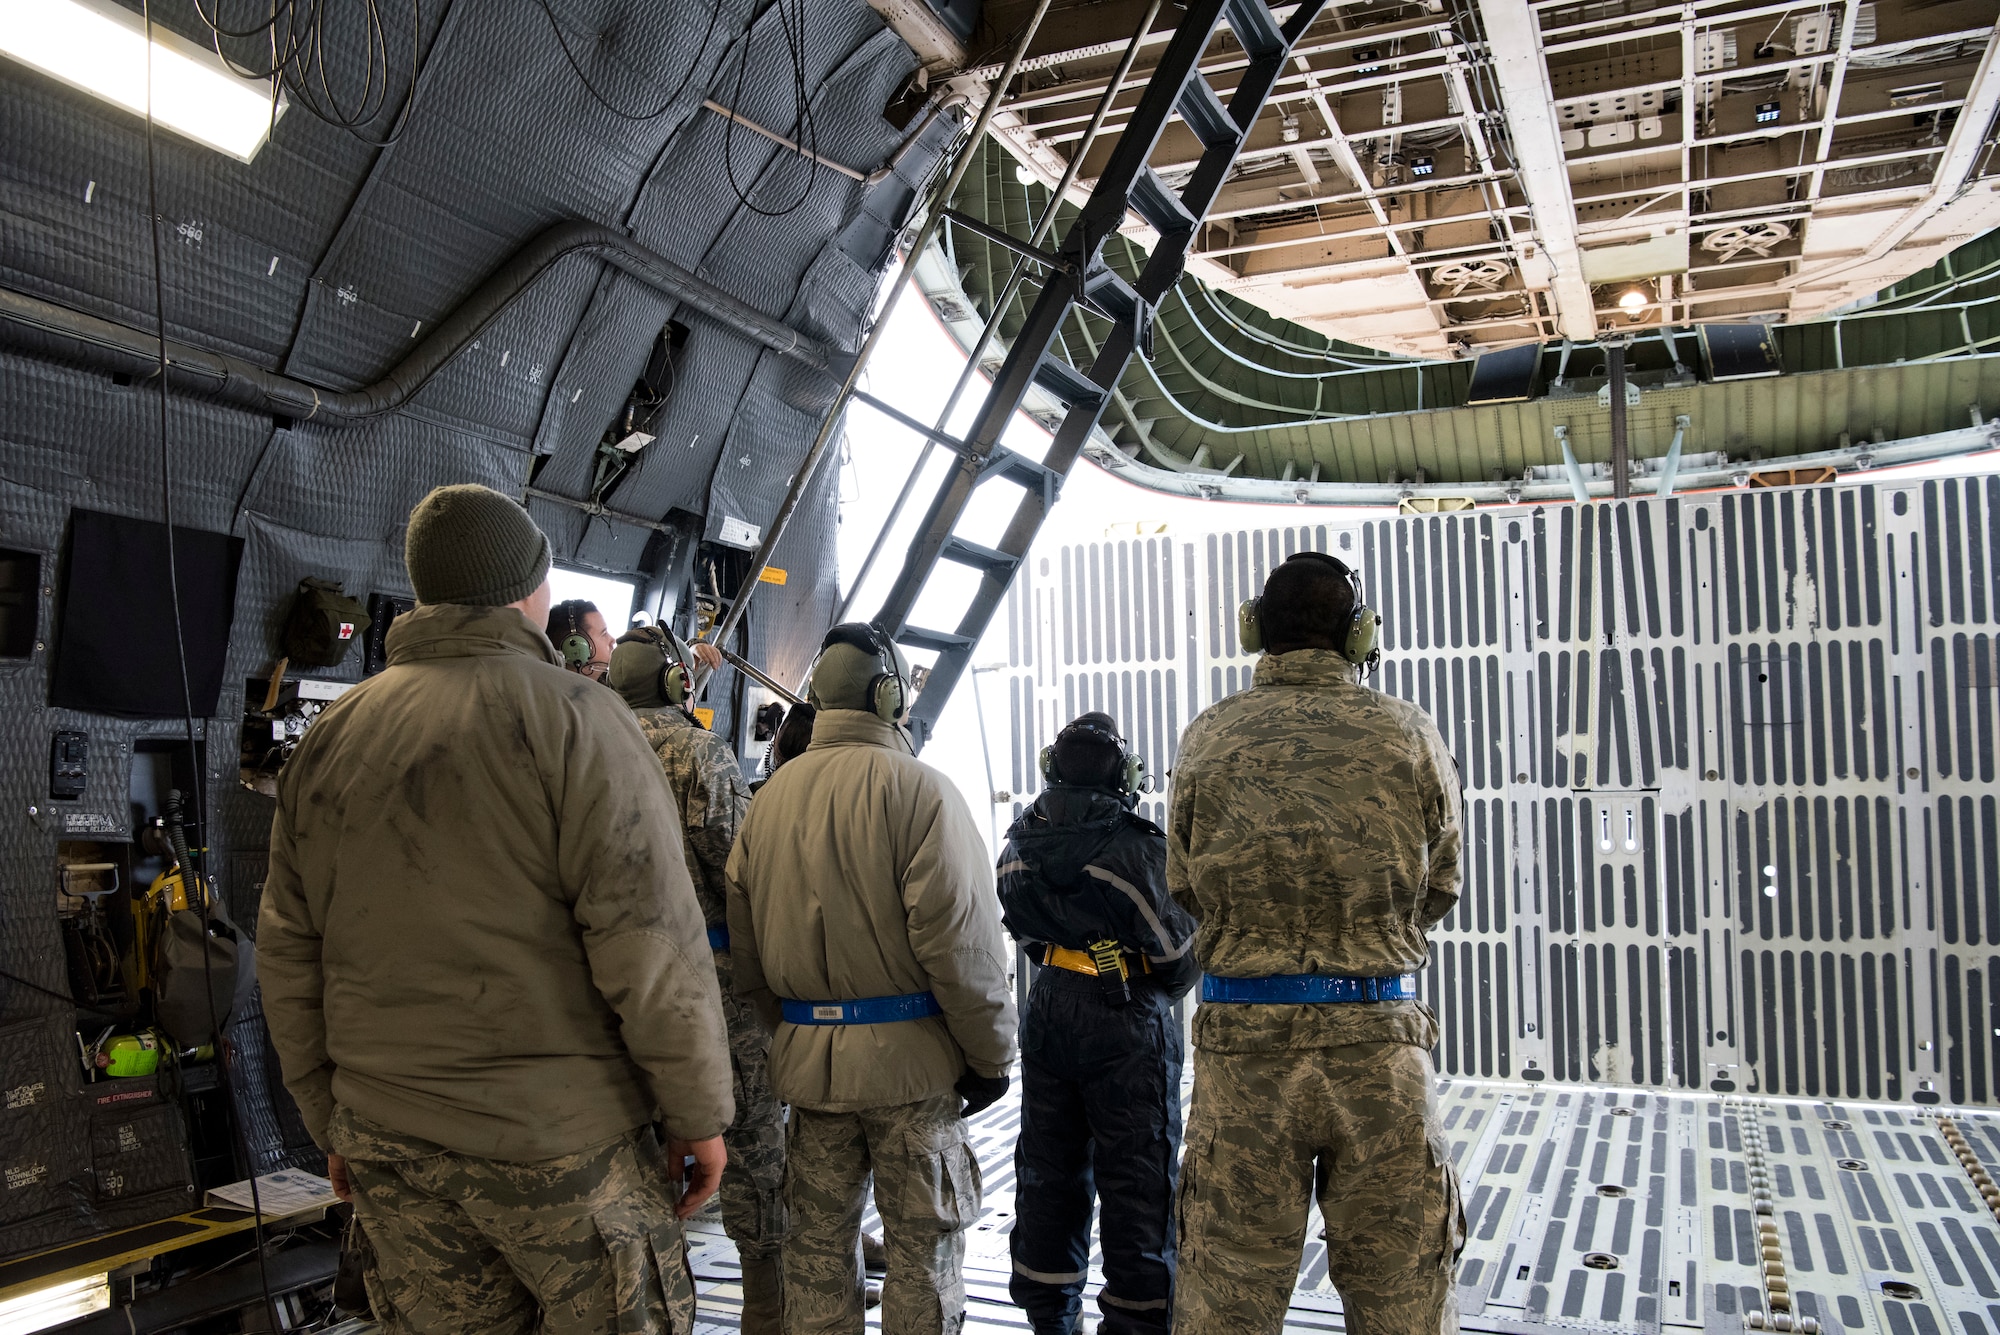 Airmen watch as a nose visor rises into place aboard a C-5M Super Galaxy aircraft at Ramstein Air Base, Germany, Nov. 29, 2018. Regional training center instructors from the 521st Air Mobility Operations Wing, headquartered at Ramstein AB, trained nearly 60 aircraft maintainers and 30 aerial port personnel on C-5 operations during a two-week training session. (U.S. Air Force photo by Staff Sgt. Aaron J. Jenne)